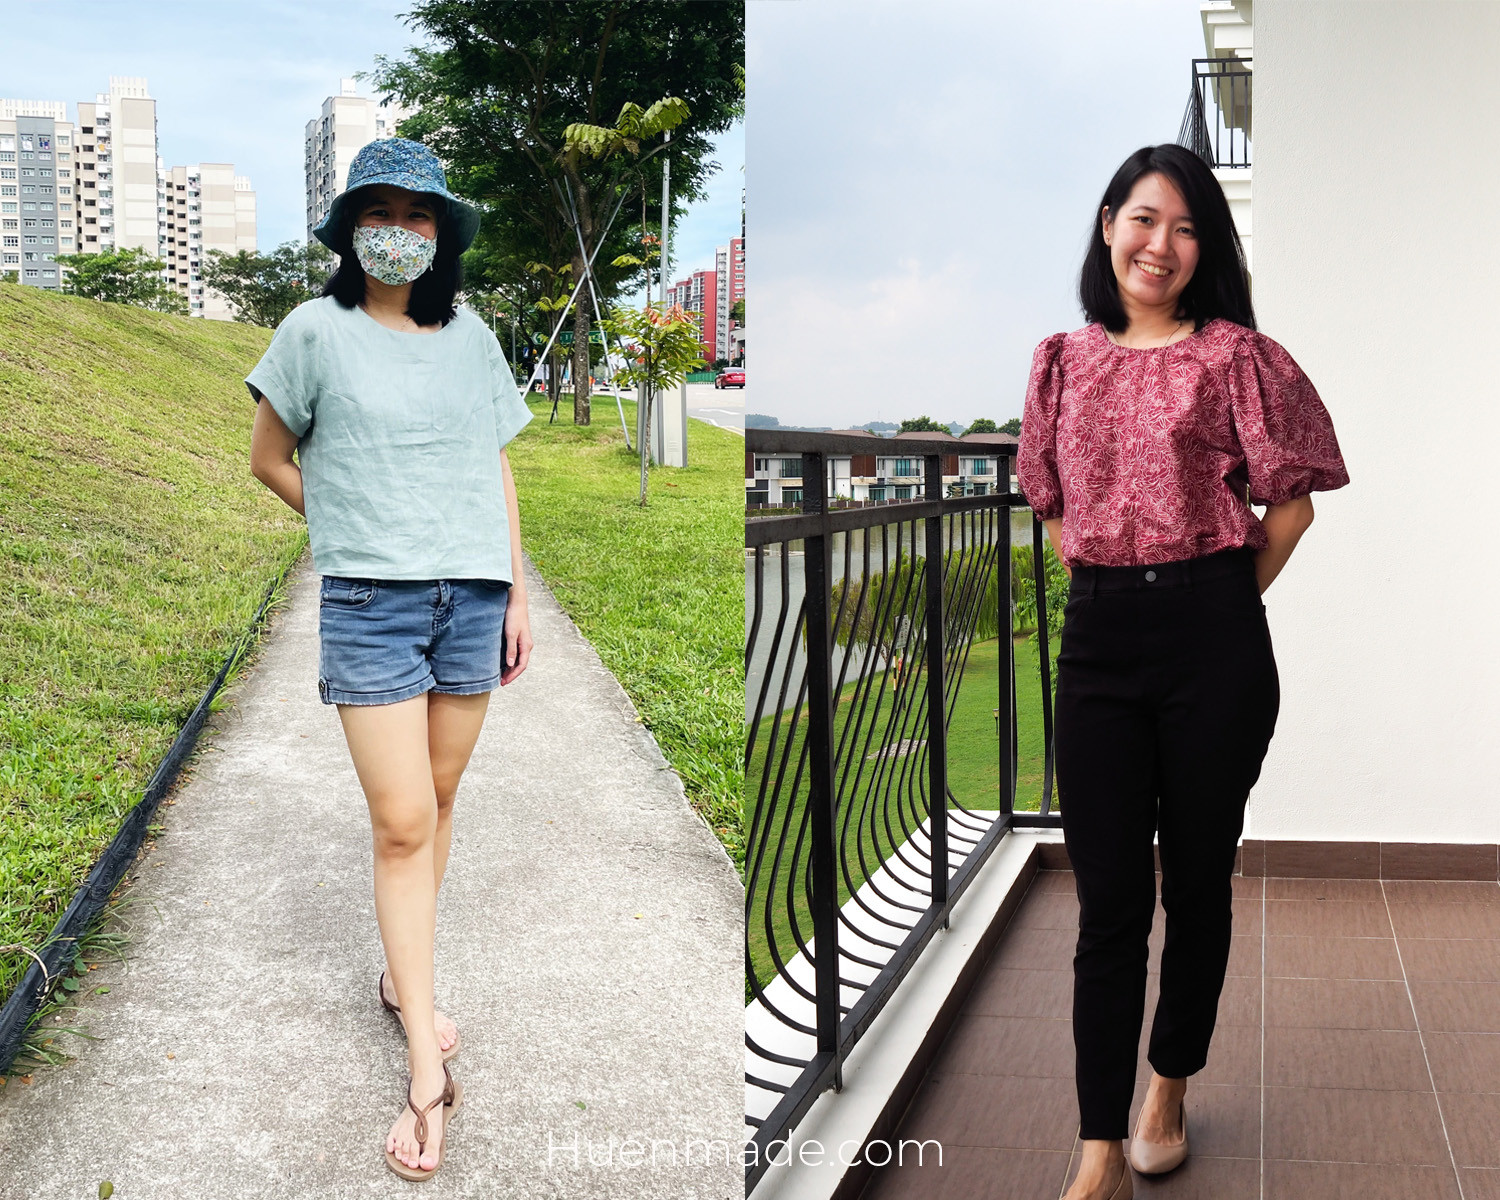 Same but different: Two Closet Core Cielo Tops